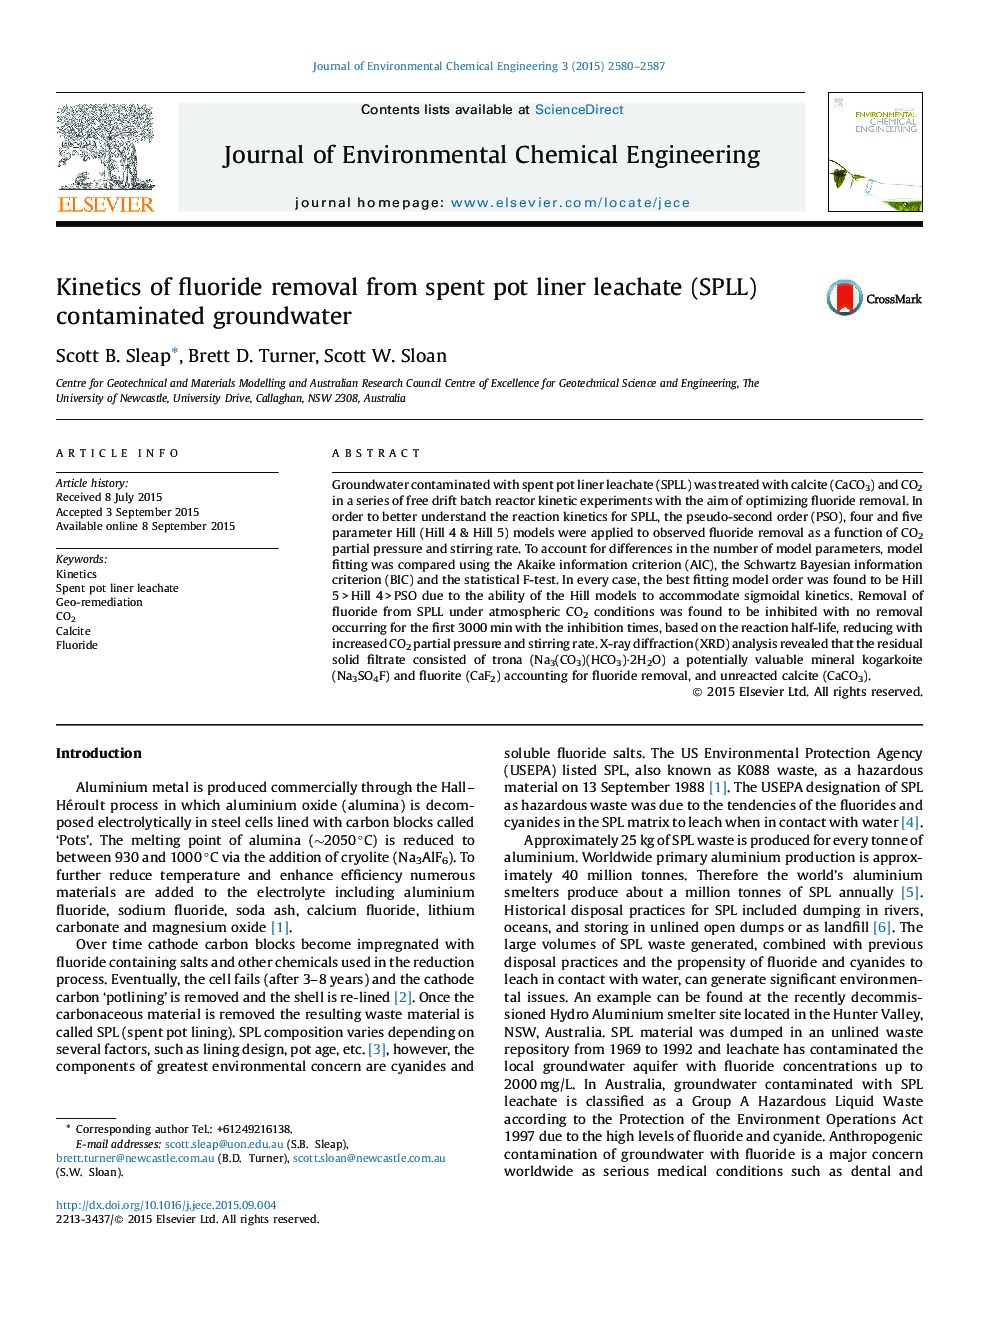 Kinetics of fluoride removal from spent pot liner leachate (SPLL) contaminated groundwater